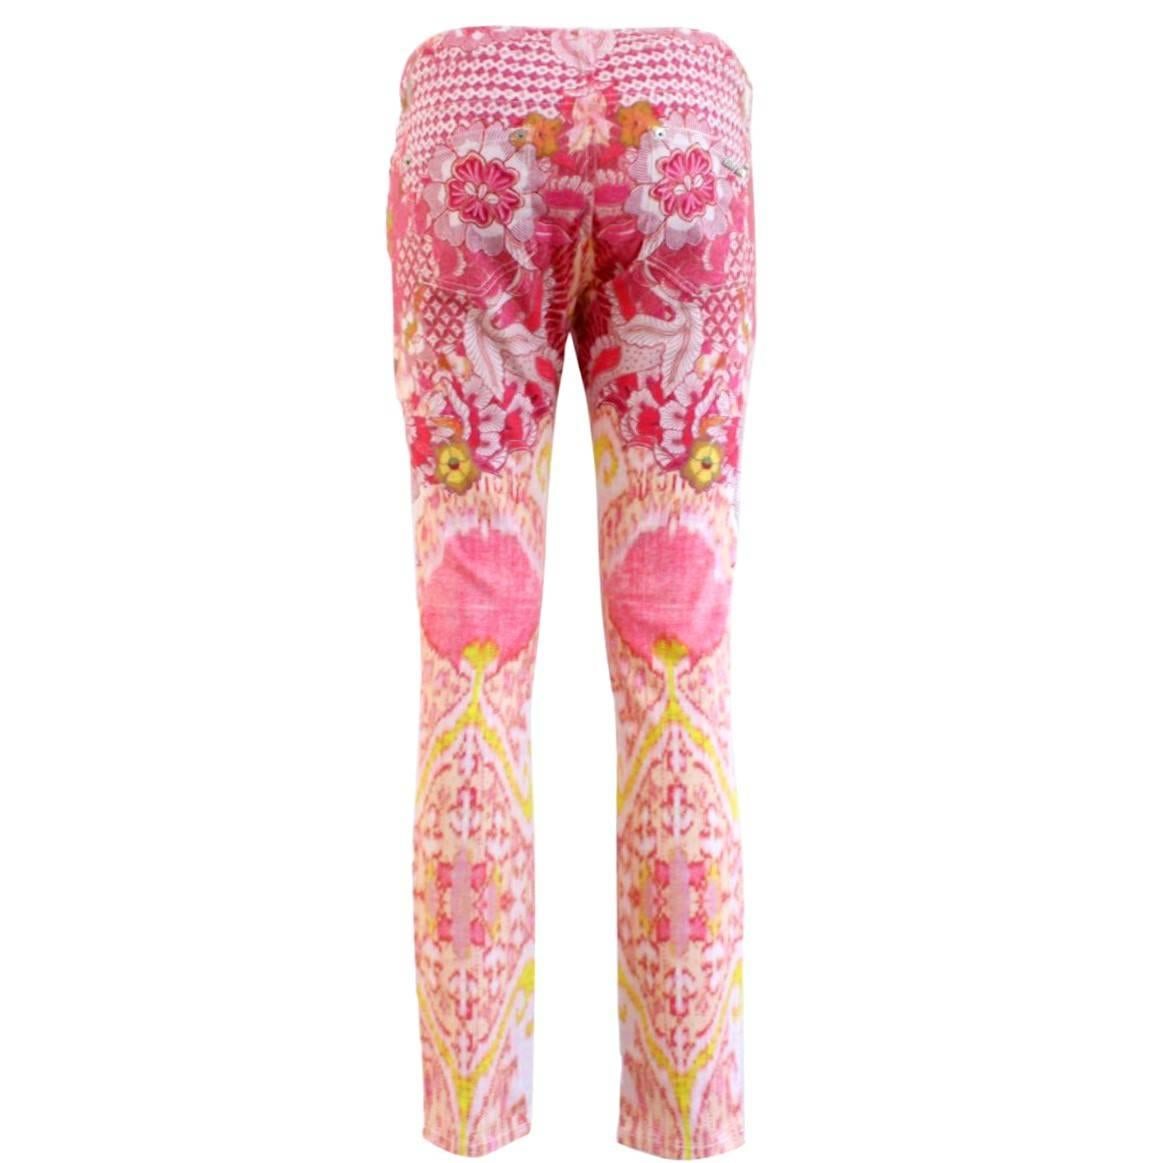 Fantastic pair of Roberto Cavalli jeans
Beautiful print, Cavallii style
Cotton
Rose and yellow fancy print
Five pockets
Italian size 42 (US 6/8)
Made in Italy
Worldwide express shipping included in the price !